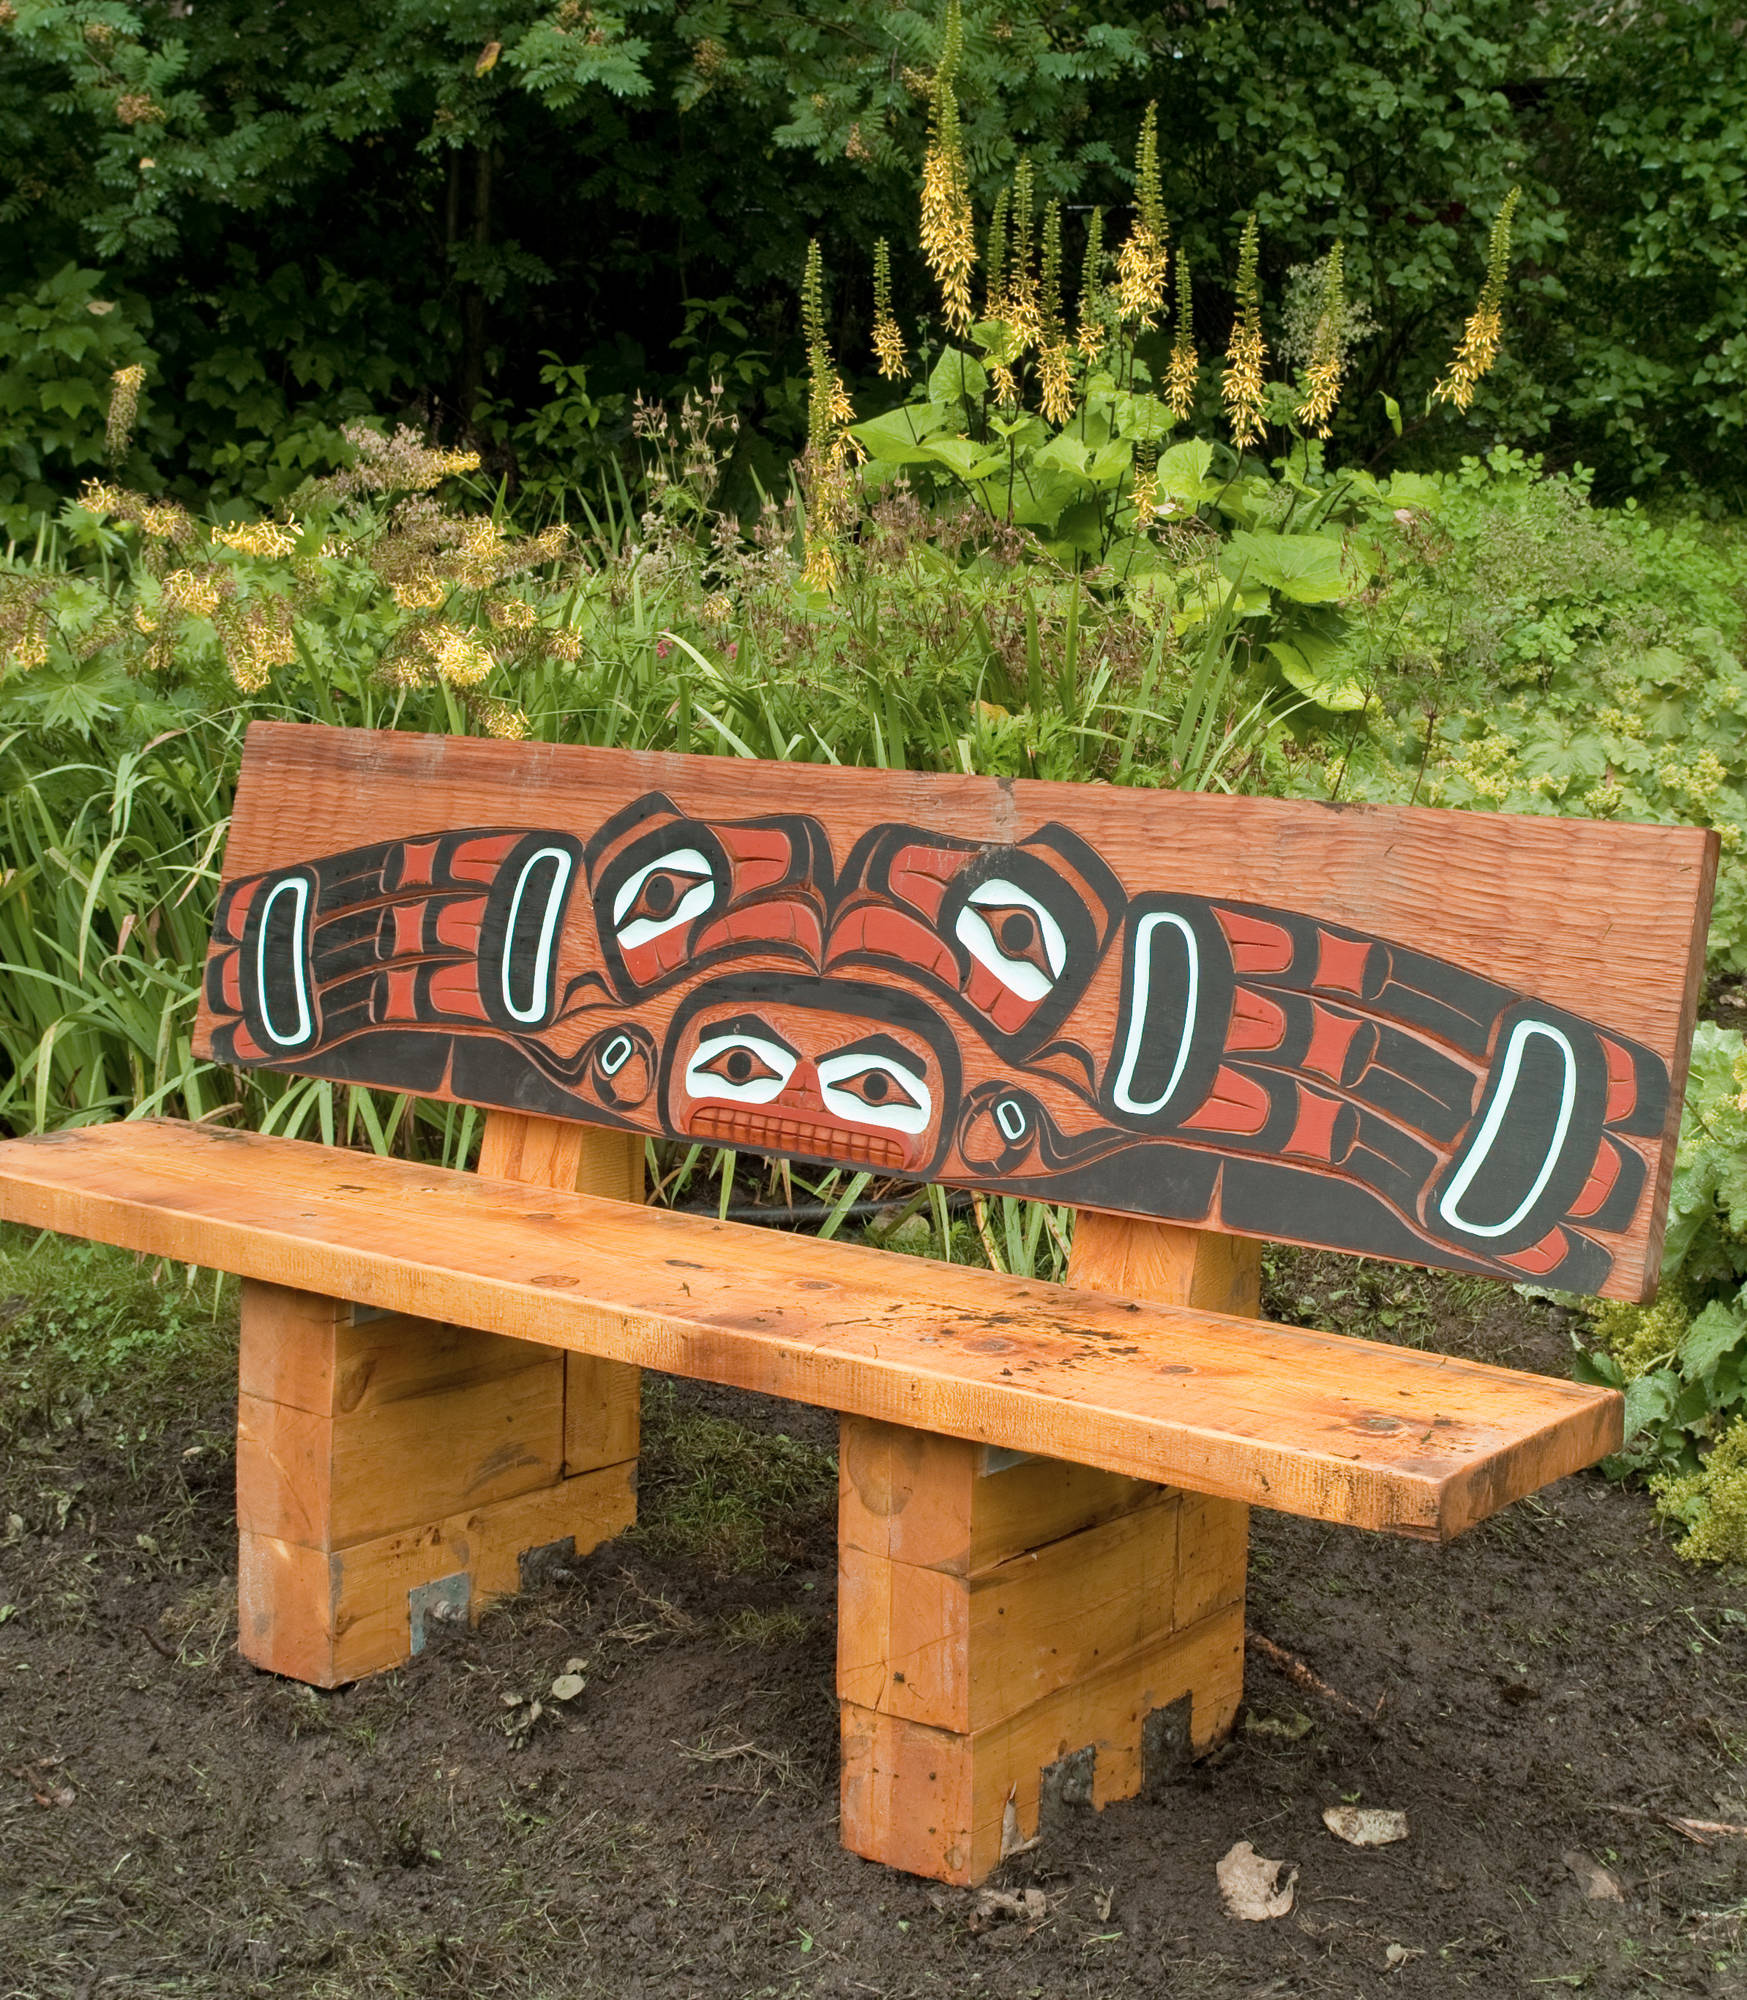 A newly painted cedar bench was recently installed at the Juneau-Douglas City Museum. (Michael Penn | Juneau Empire)